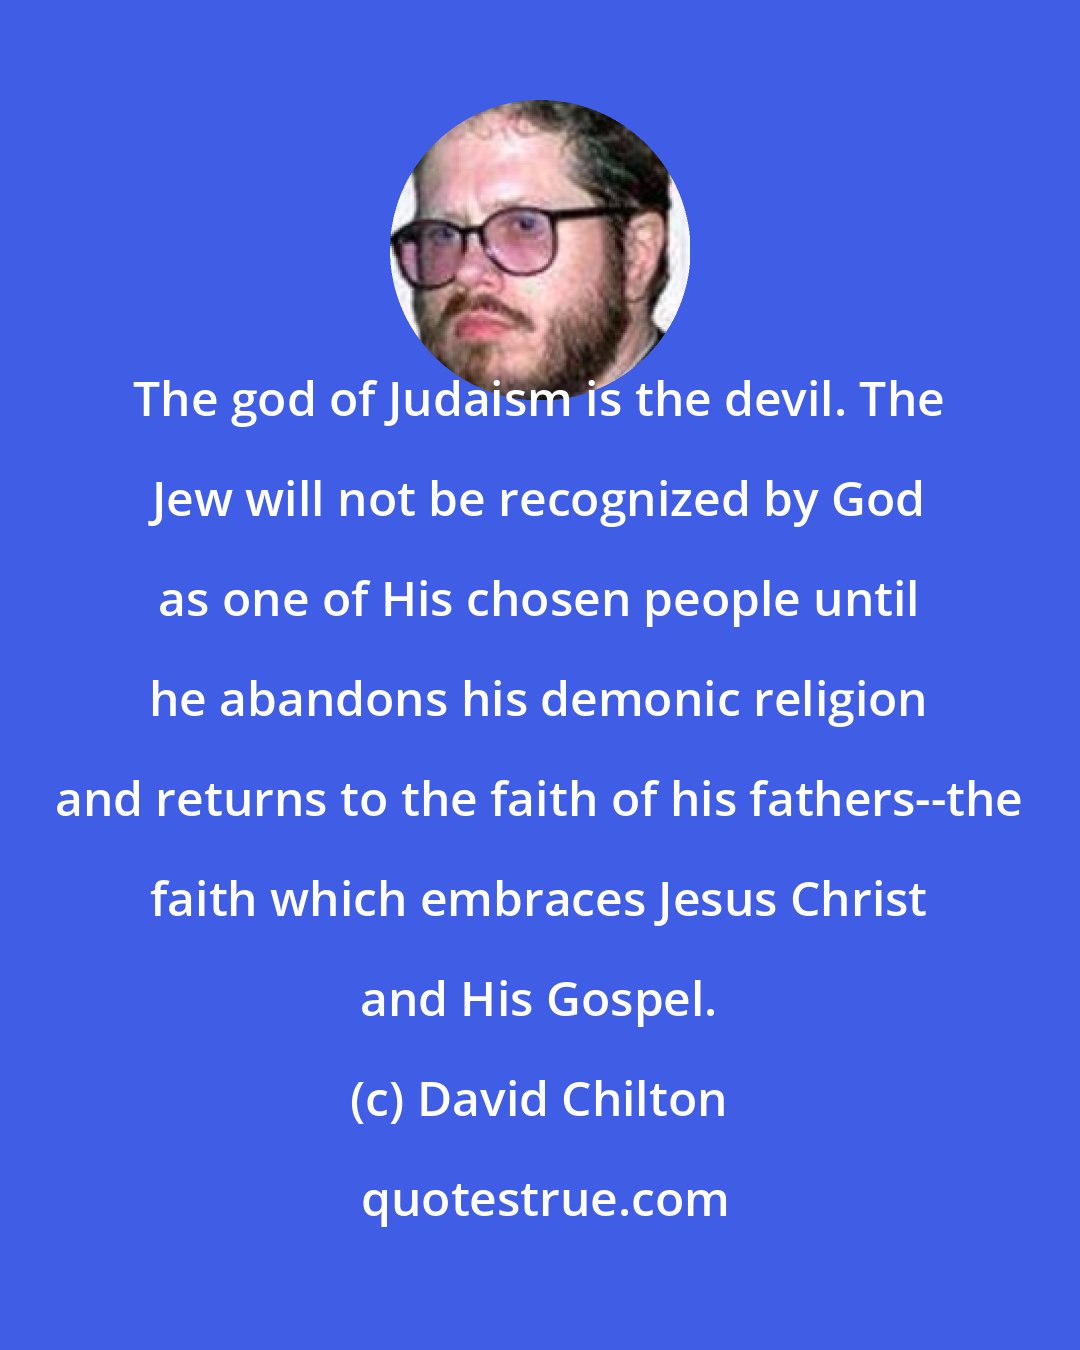 David Chilton: The god of Judaism is the devil. The Jew will not be recognized by God as one of His chosen people until he abandons his demonic religion and returns to the faith of his fathers--the faith which embraces Jesus Christ and His Gospel.